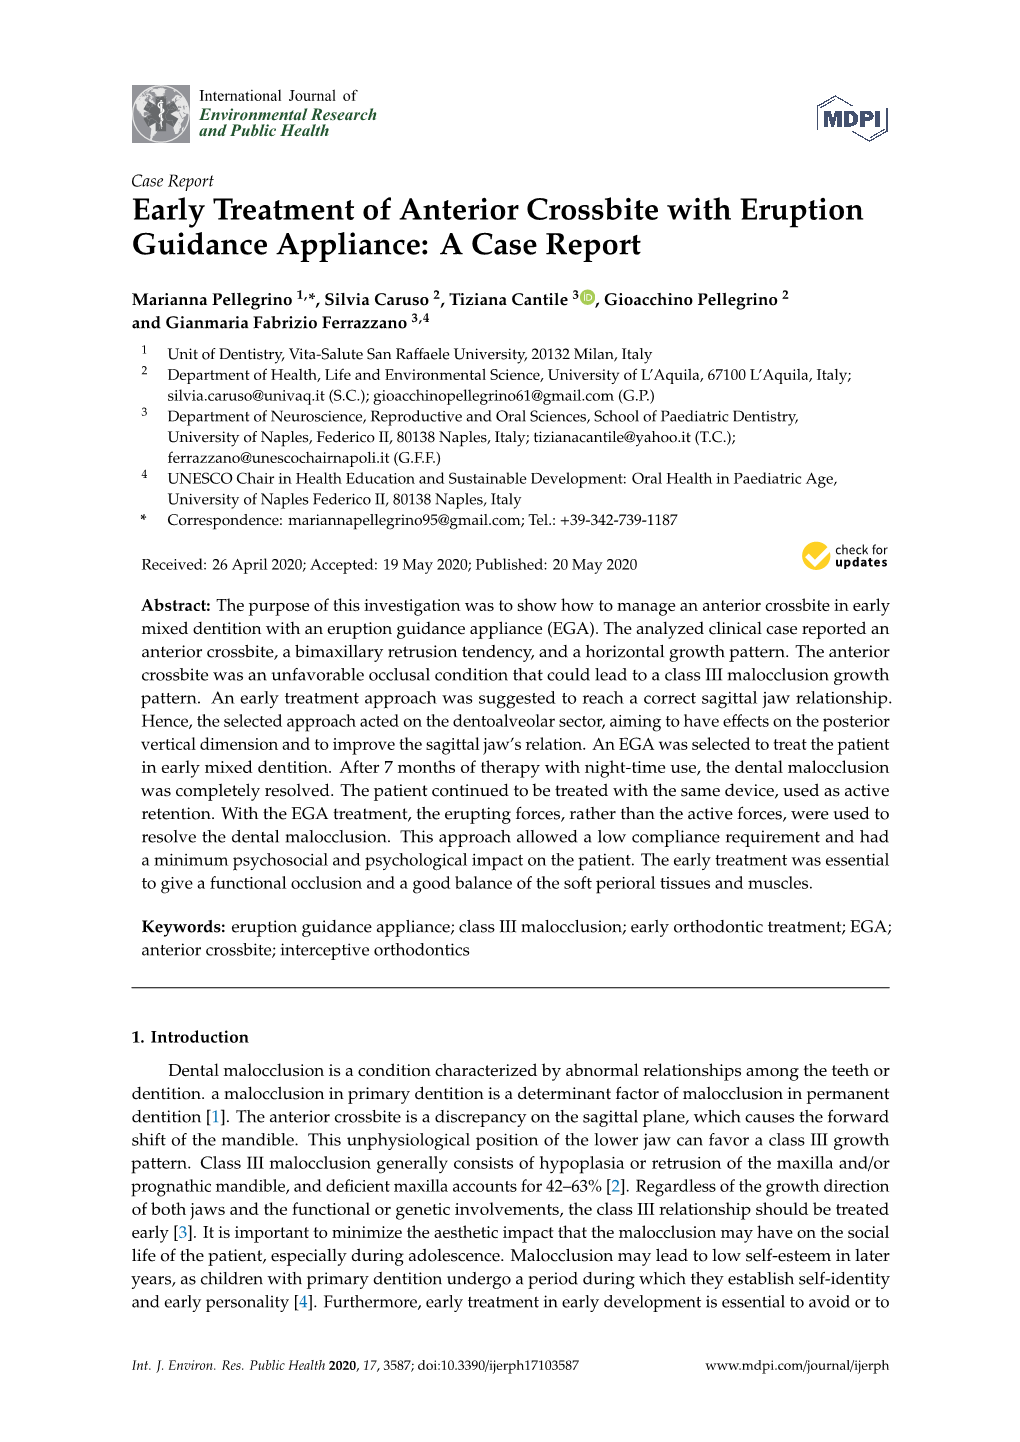 Early Treatment of Anterior Crossbite with Eruption Guidance Appliance: a Case Report